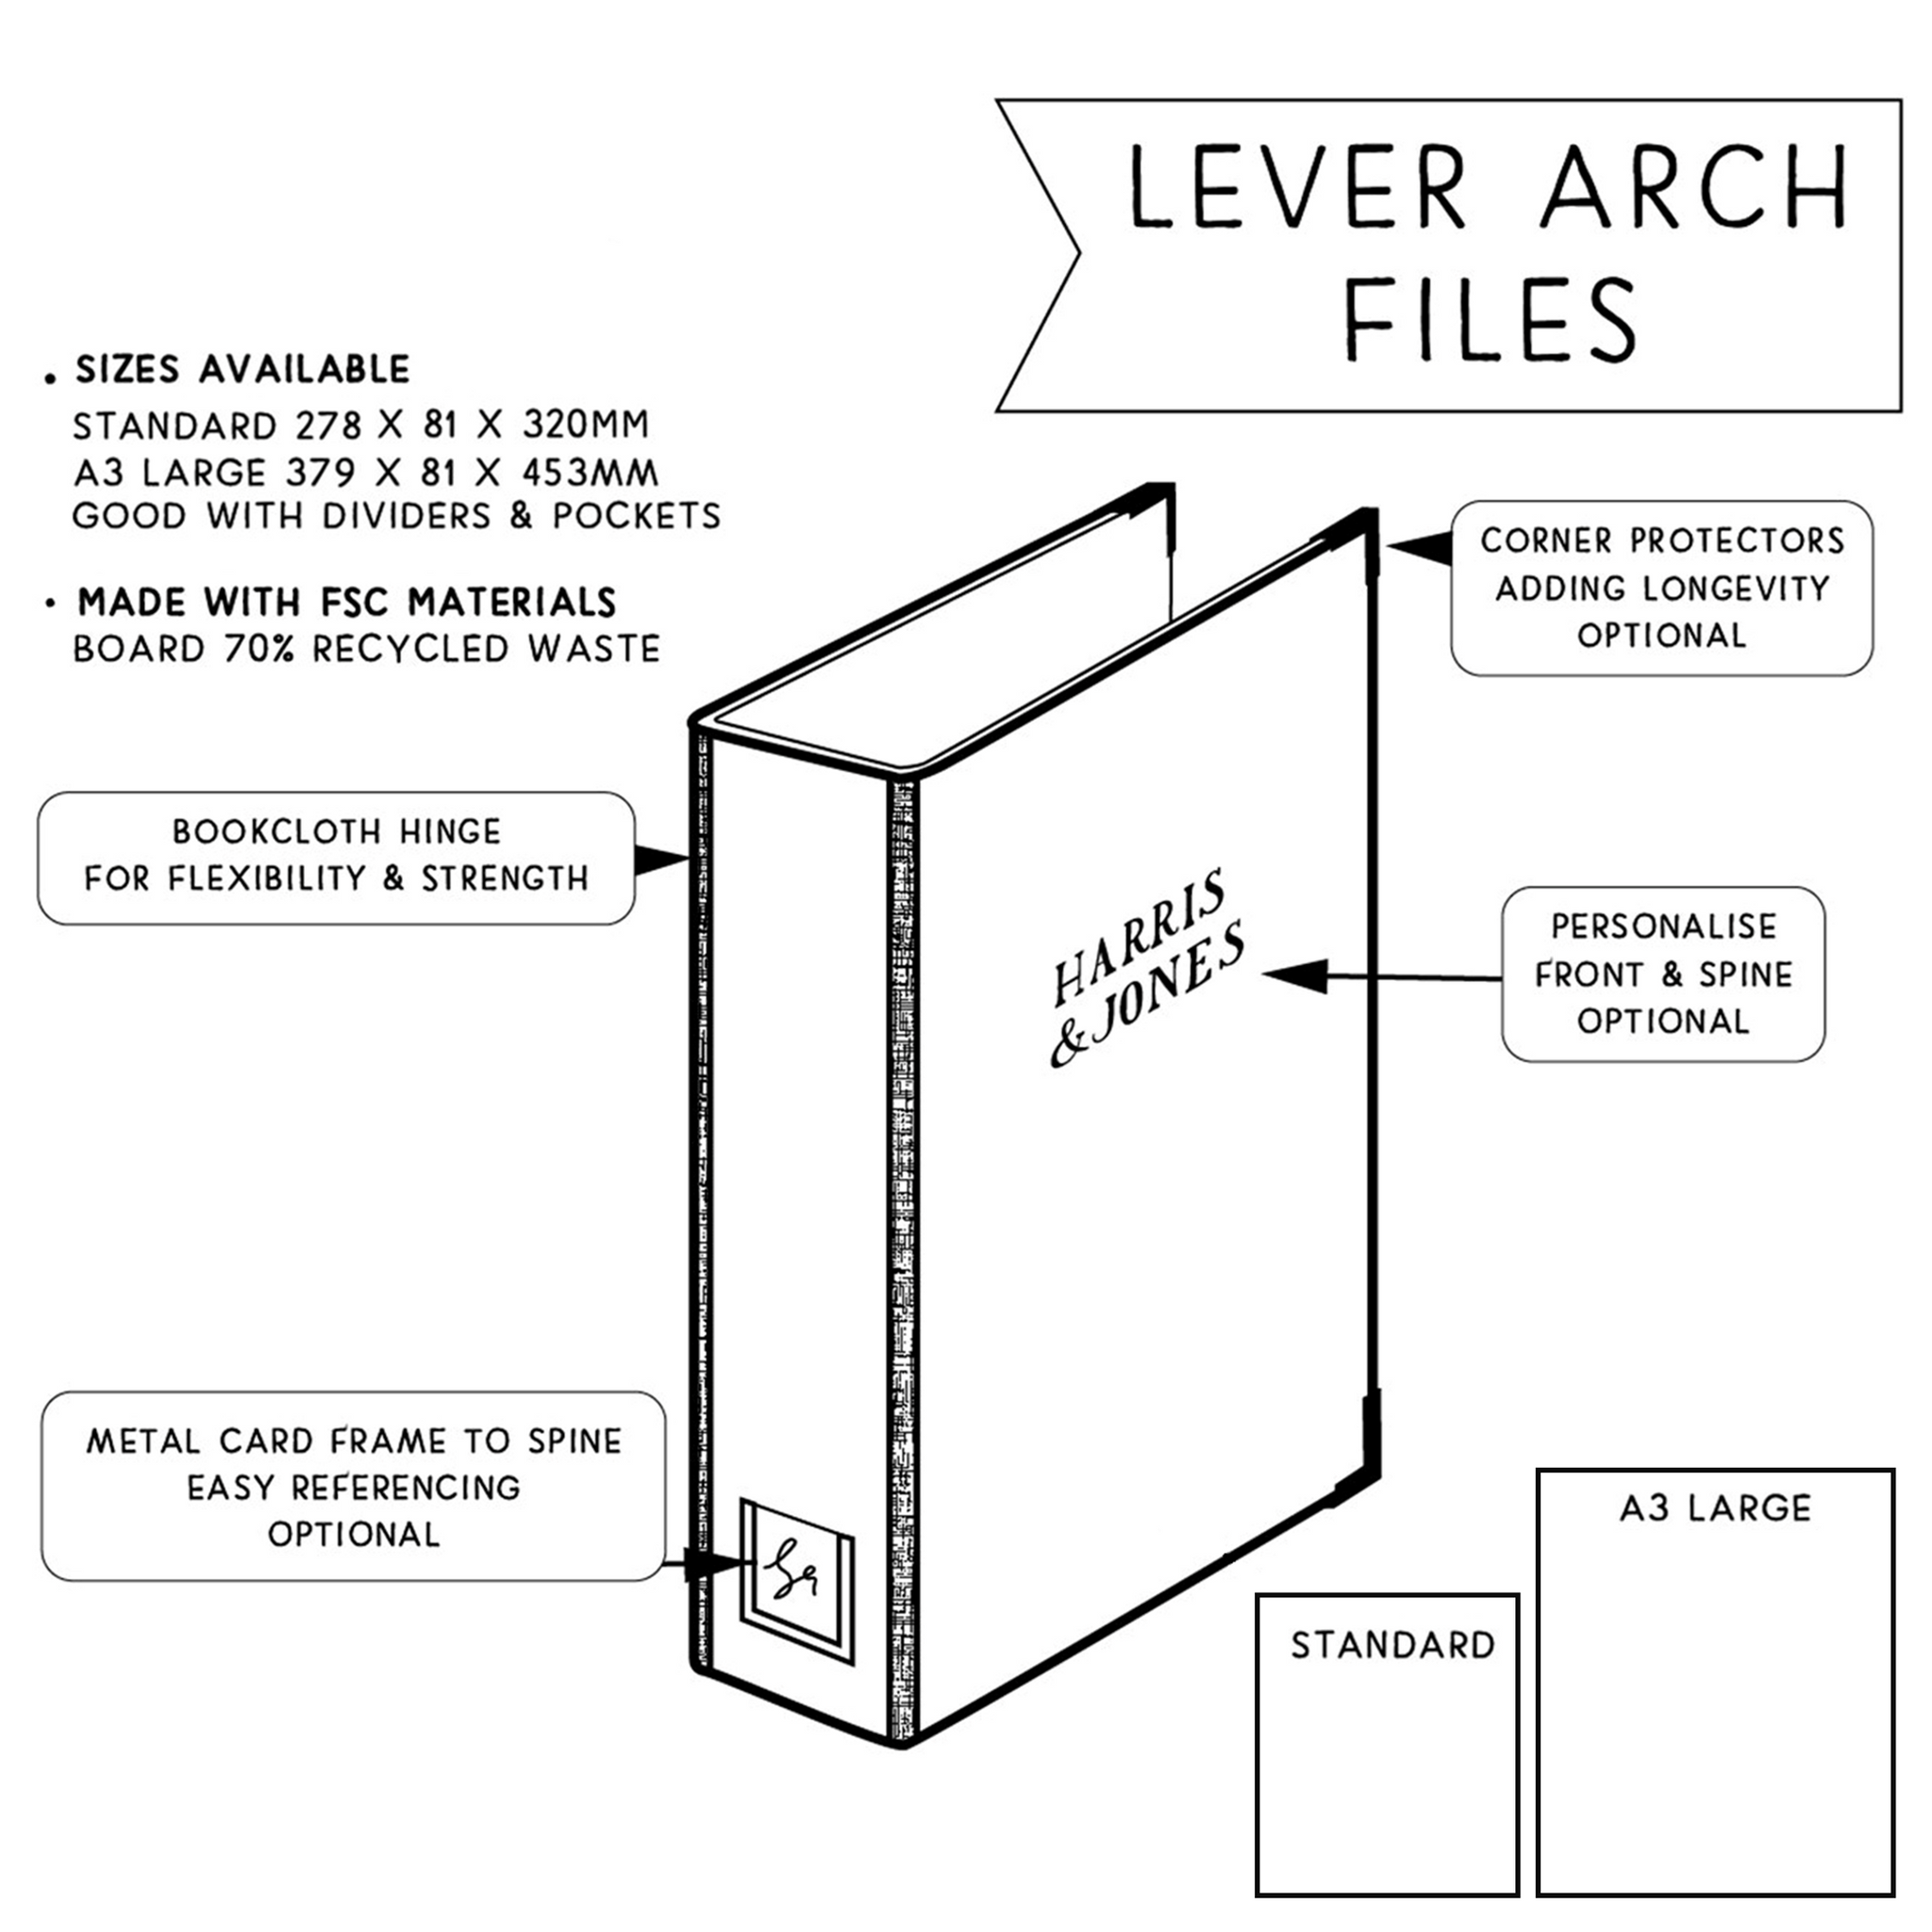 Patterned Lever Arch Files